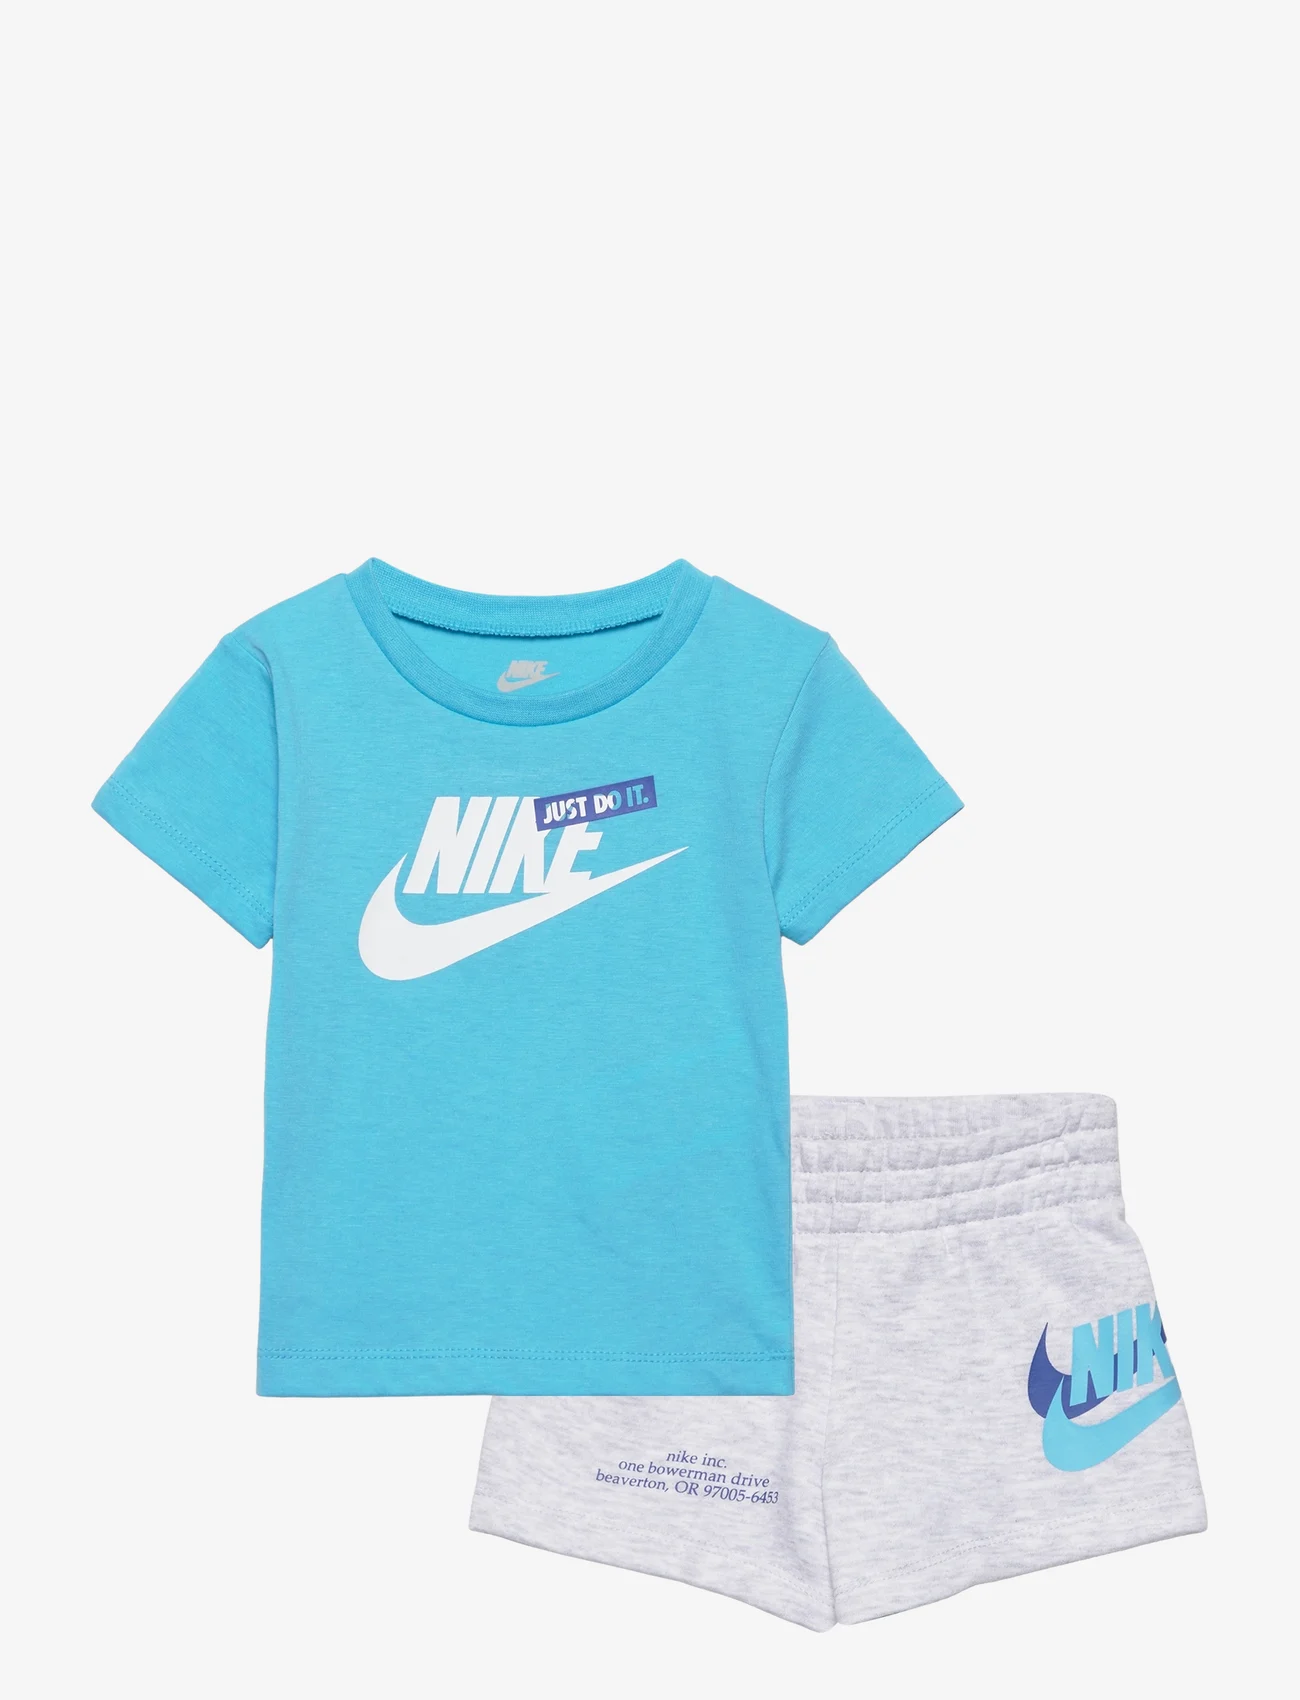 Respect Antecedent kopen Nike N Nsw Hbr Icon Short Set (Birch Heather), (21.61 €) | Large selection  of outlet-styles | Booztlet.com